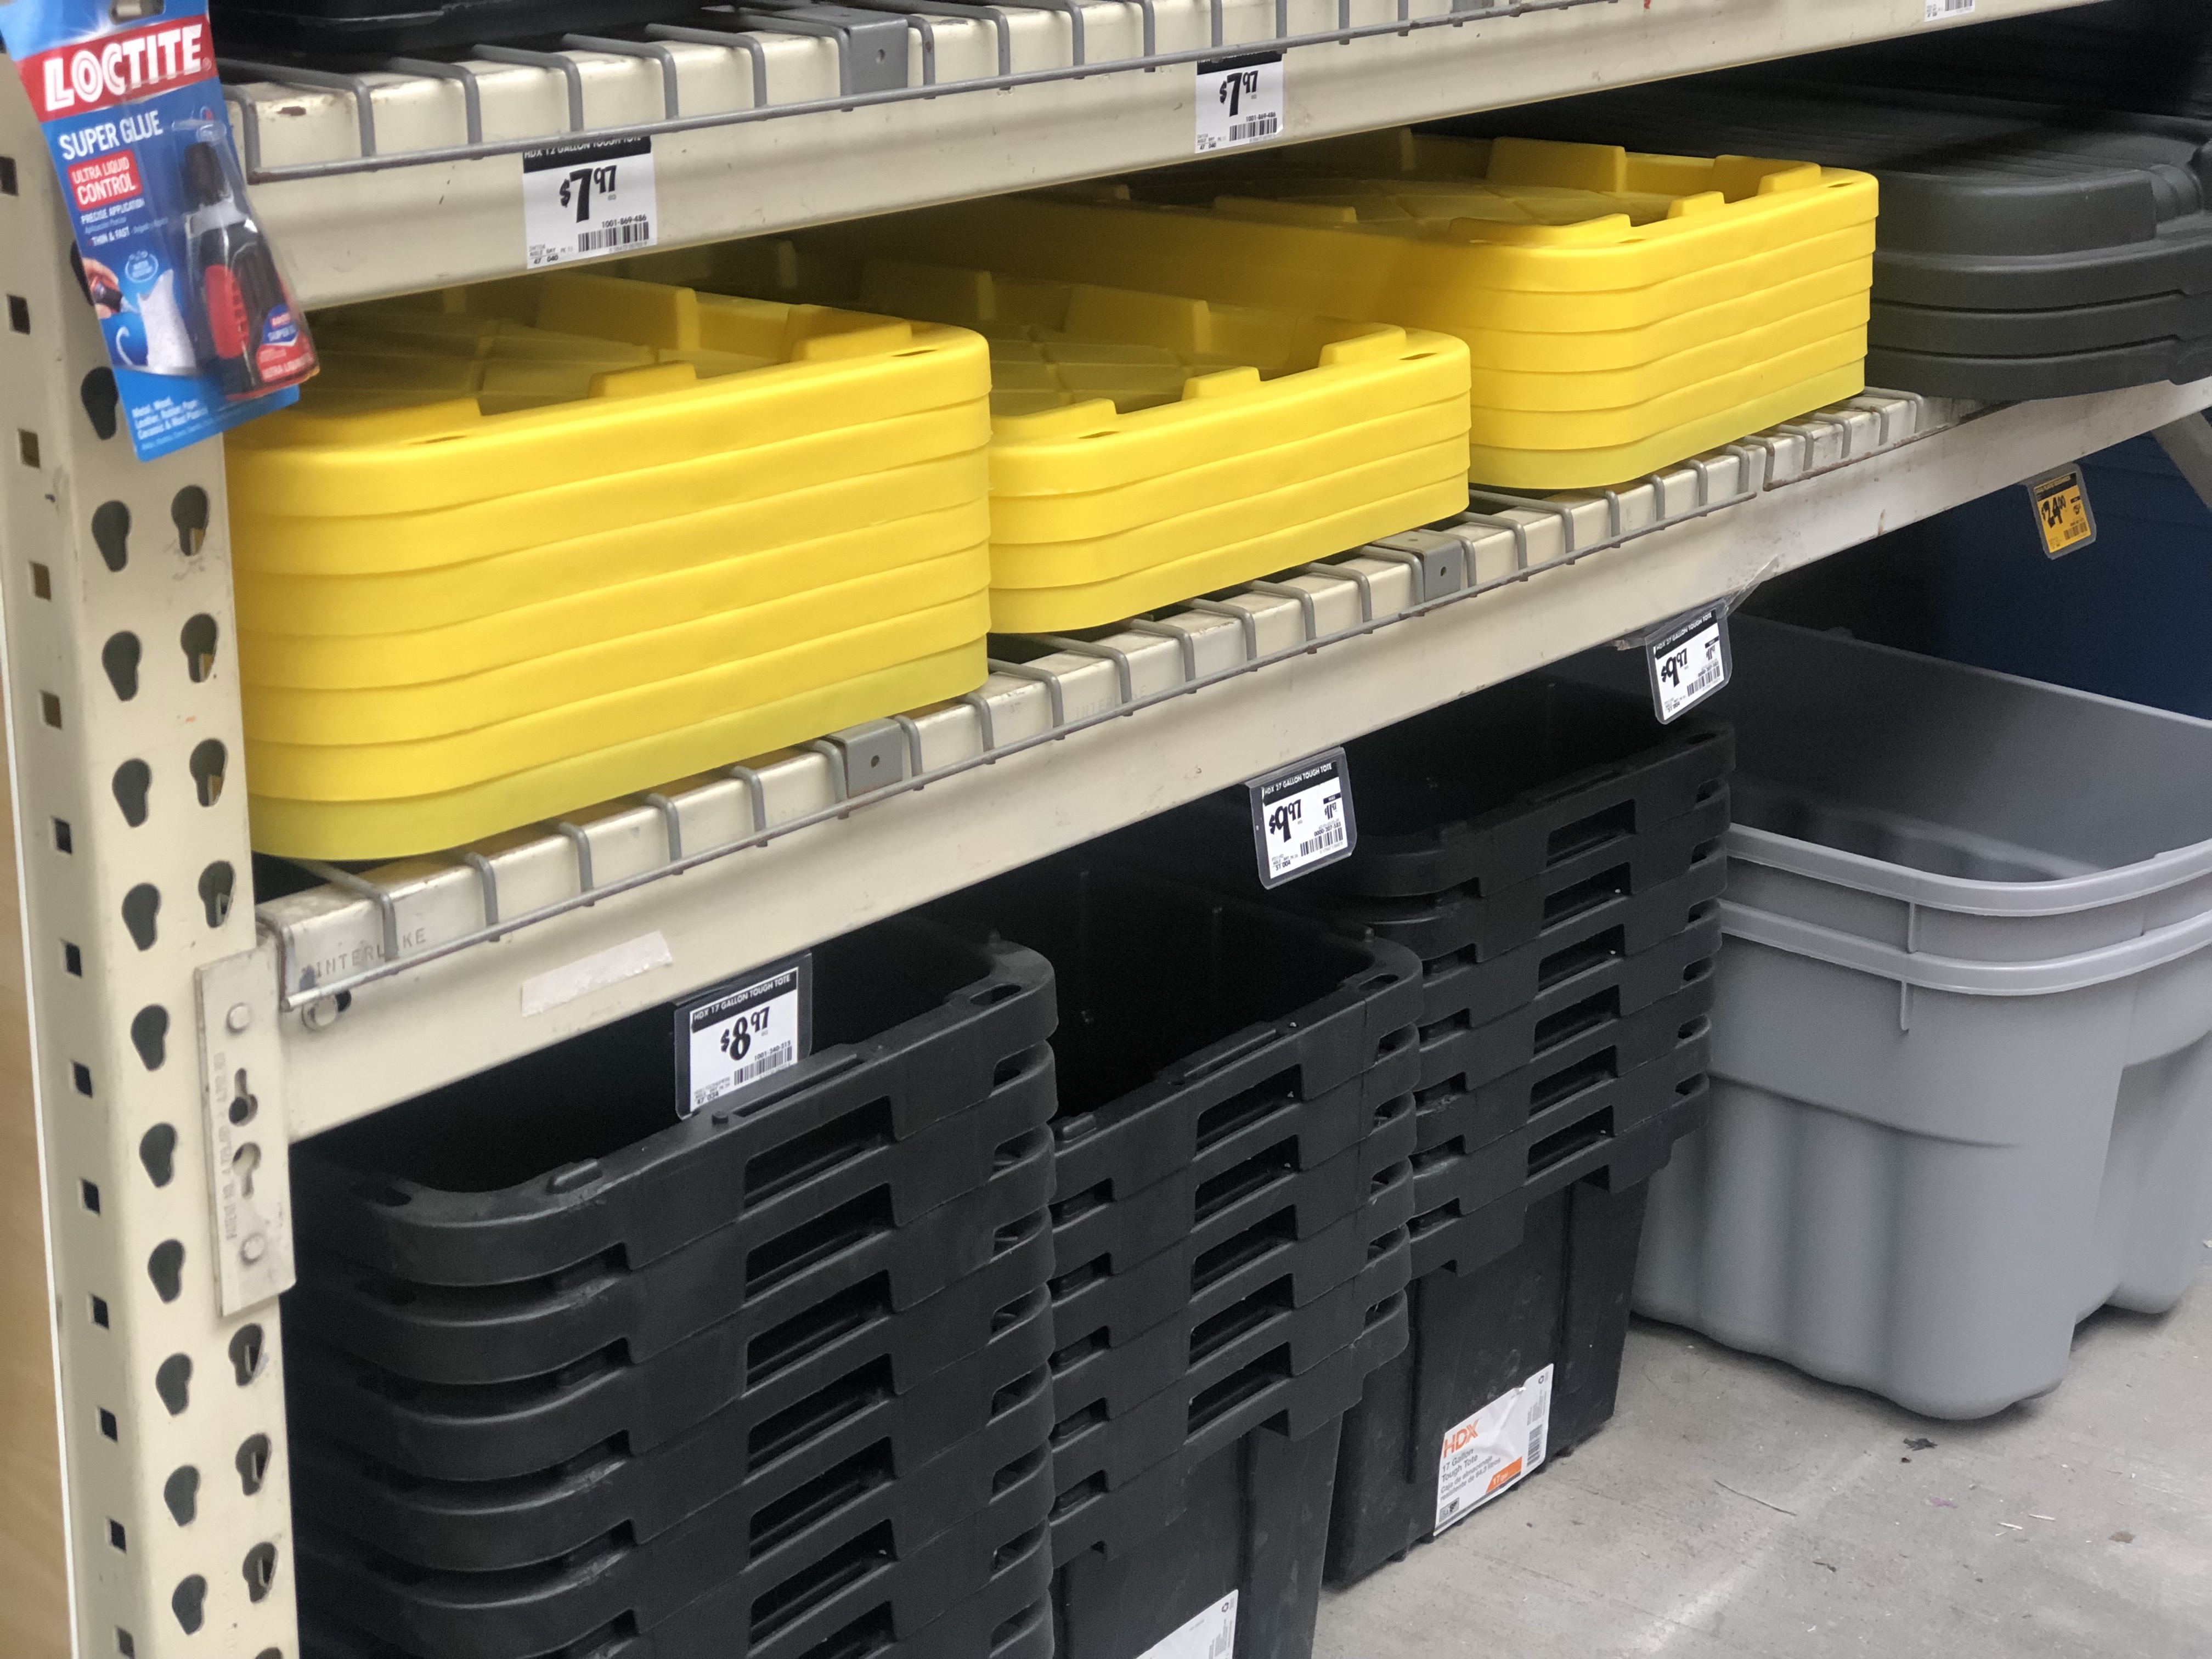 HDX 17 Gal. Tough Storage Tote in Black with Yellow Lid SH17GTOUGHTLDBY -  The Home Depot